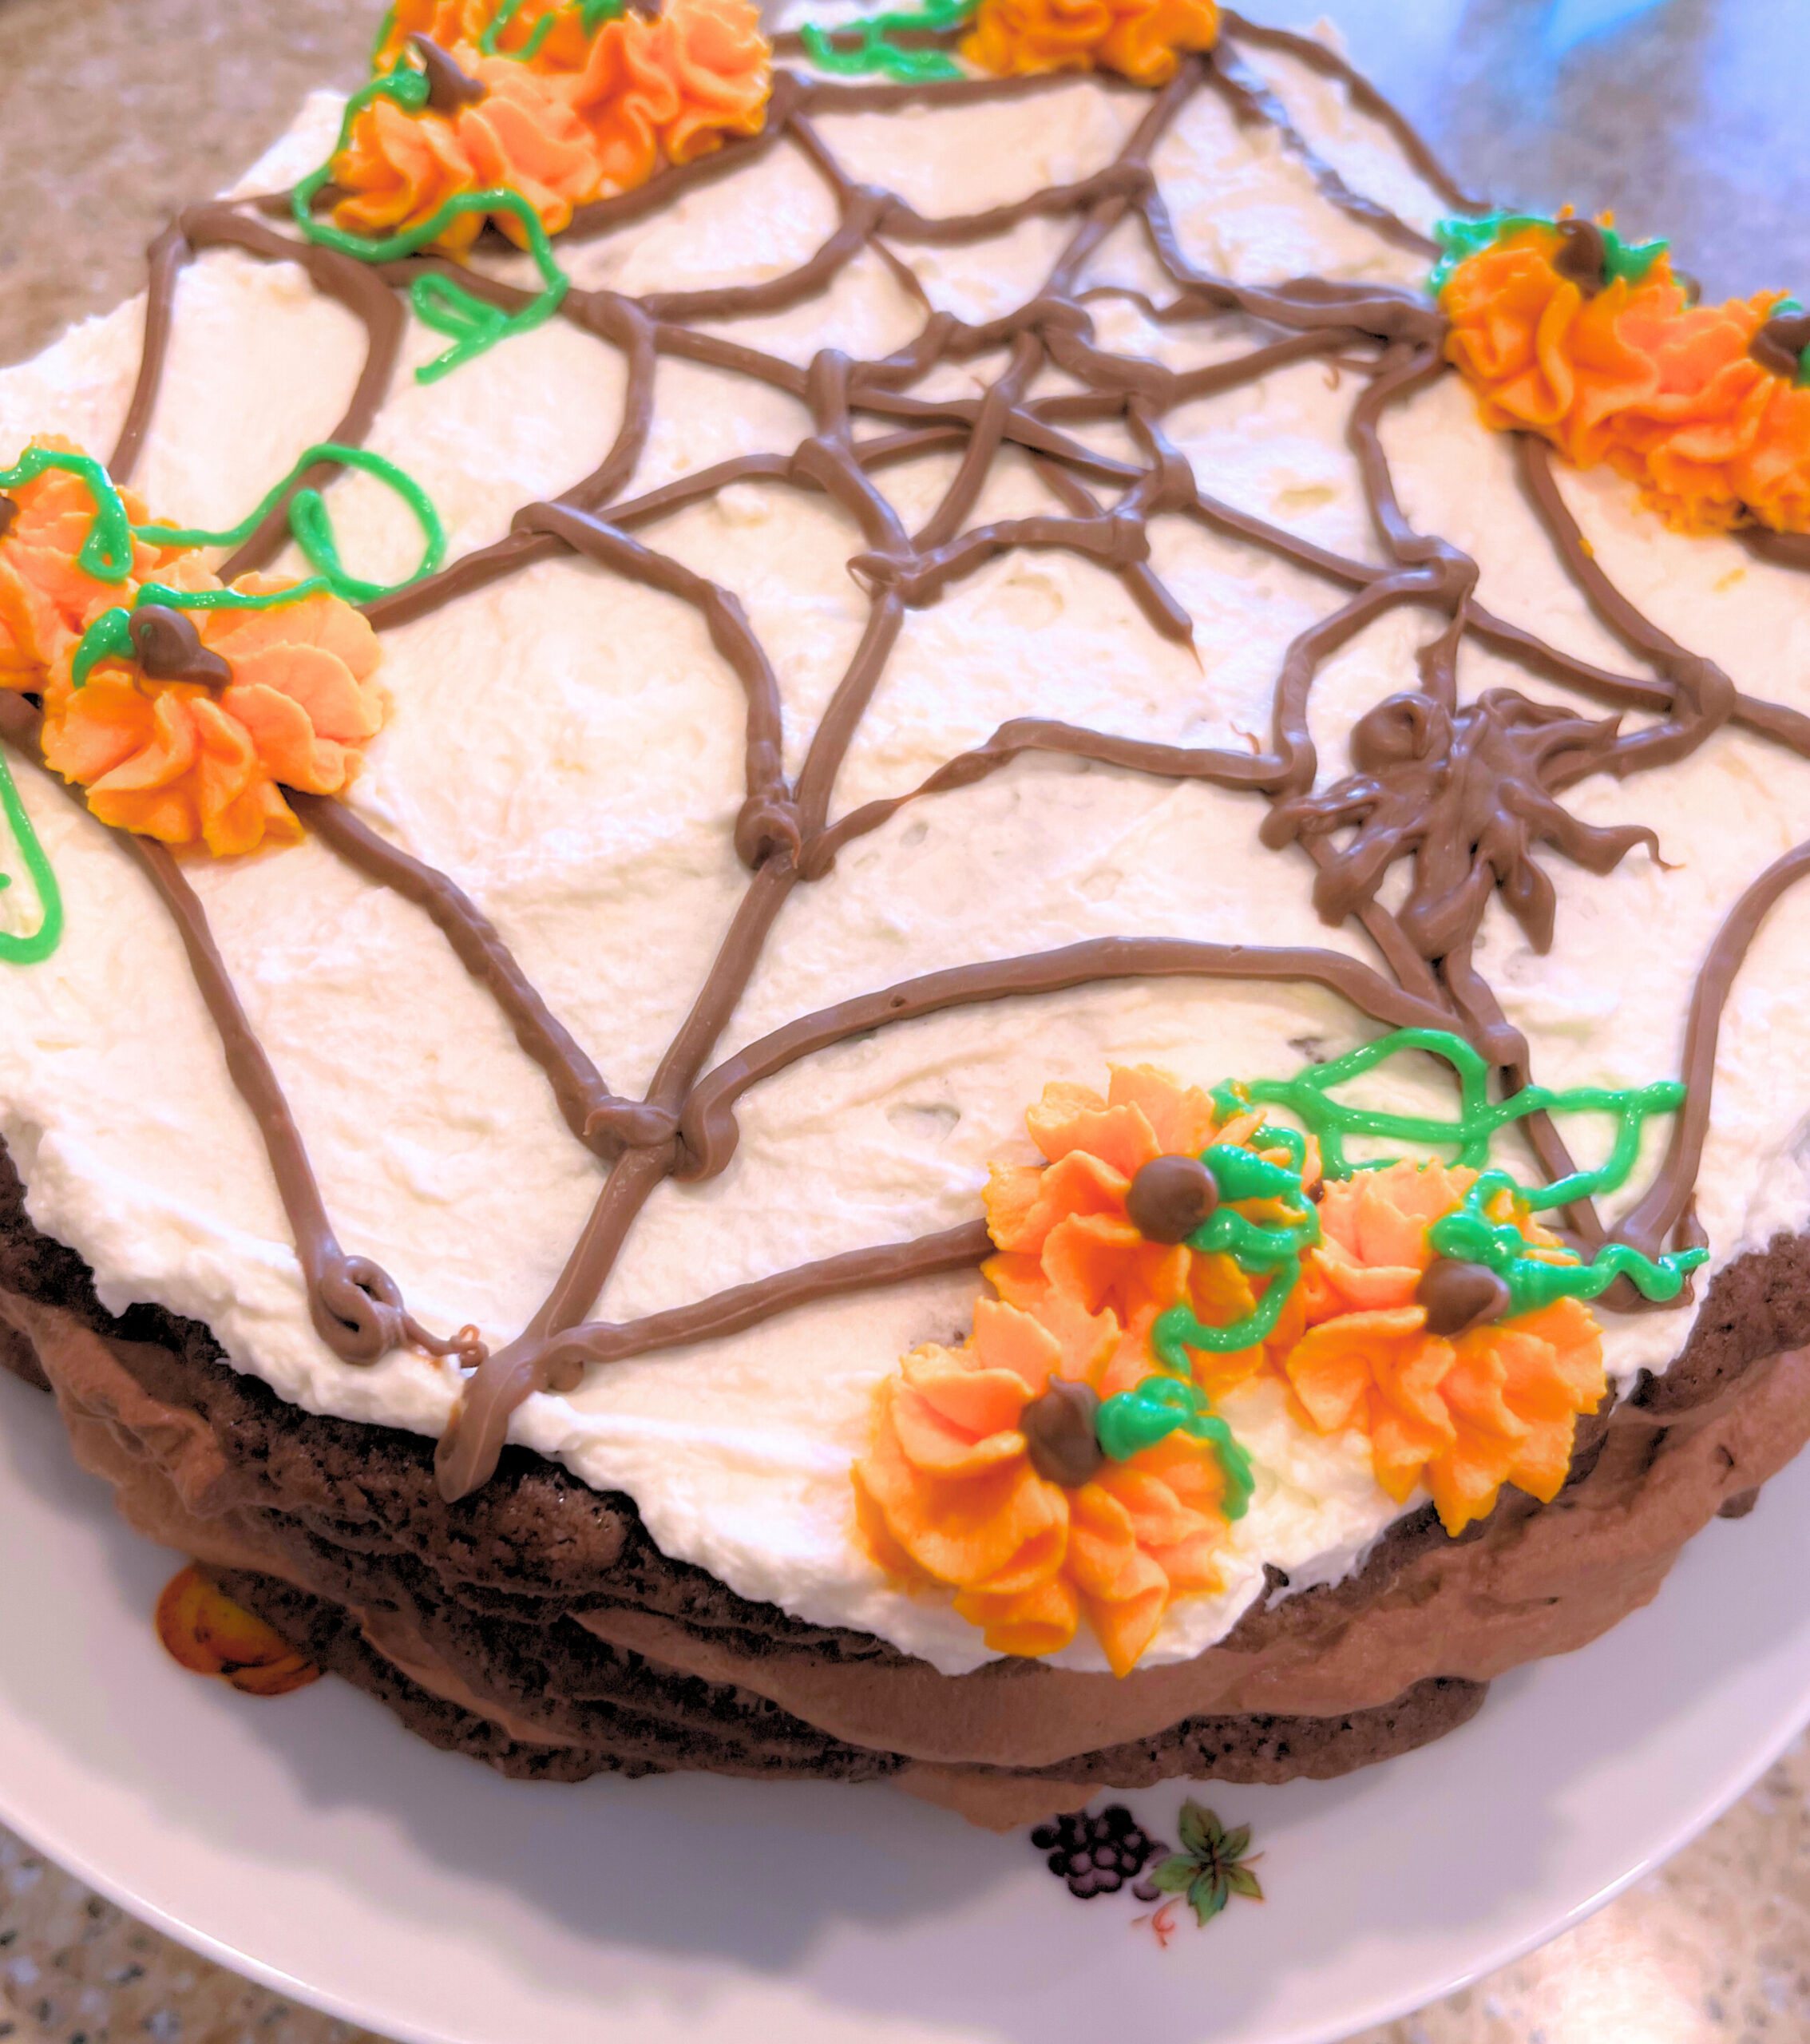 Chocolate Caramel Torte decorated with chocolate spider web and orange pumpkins with green icing vines